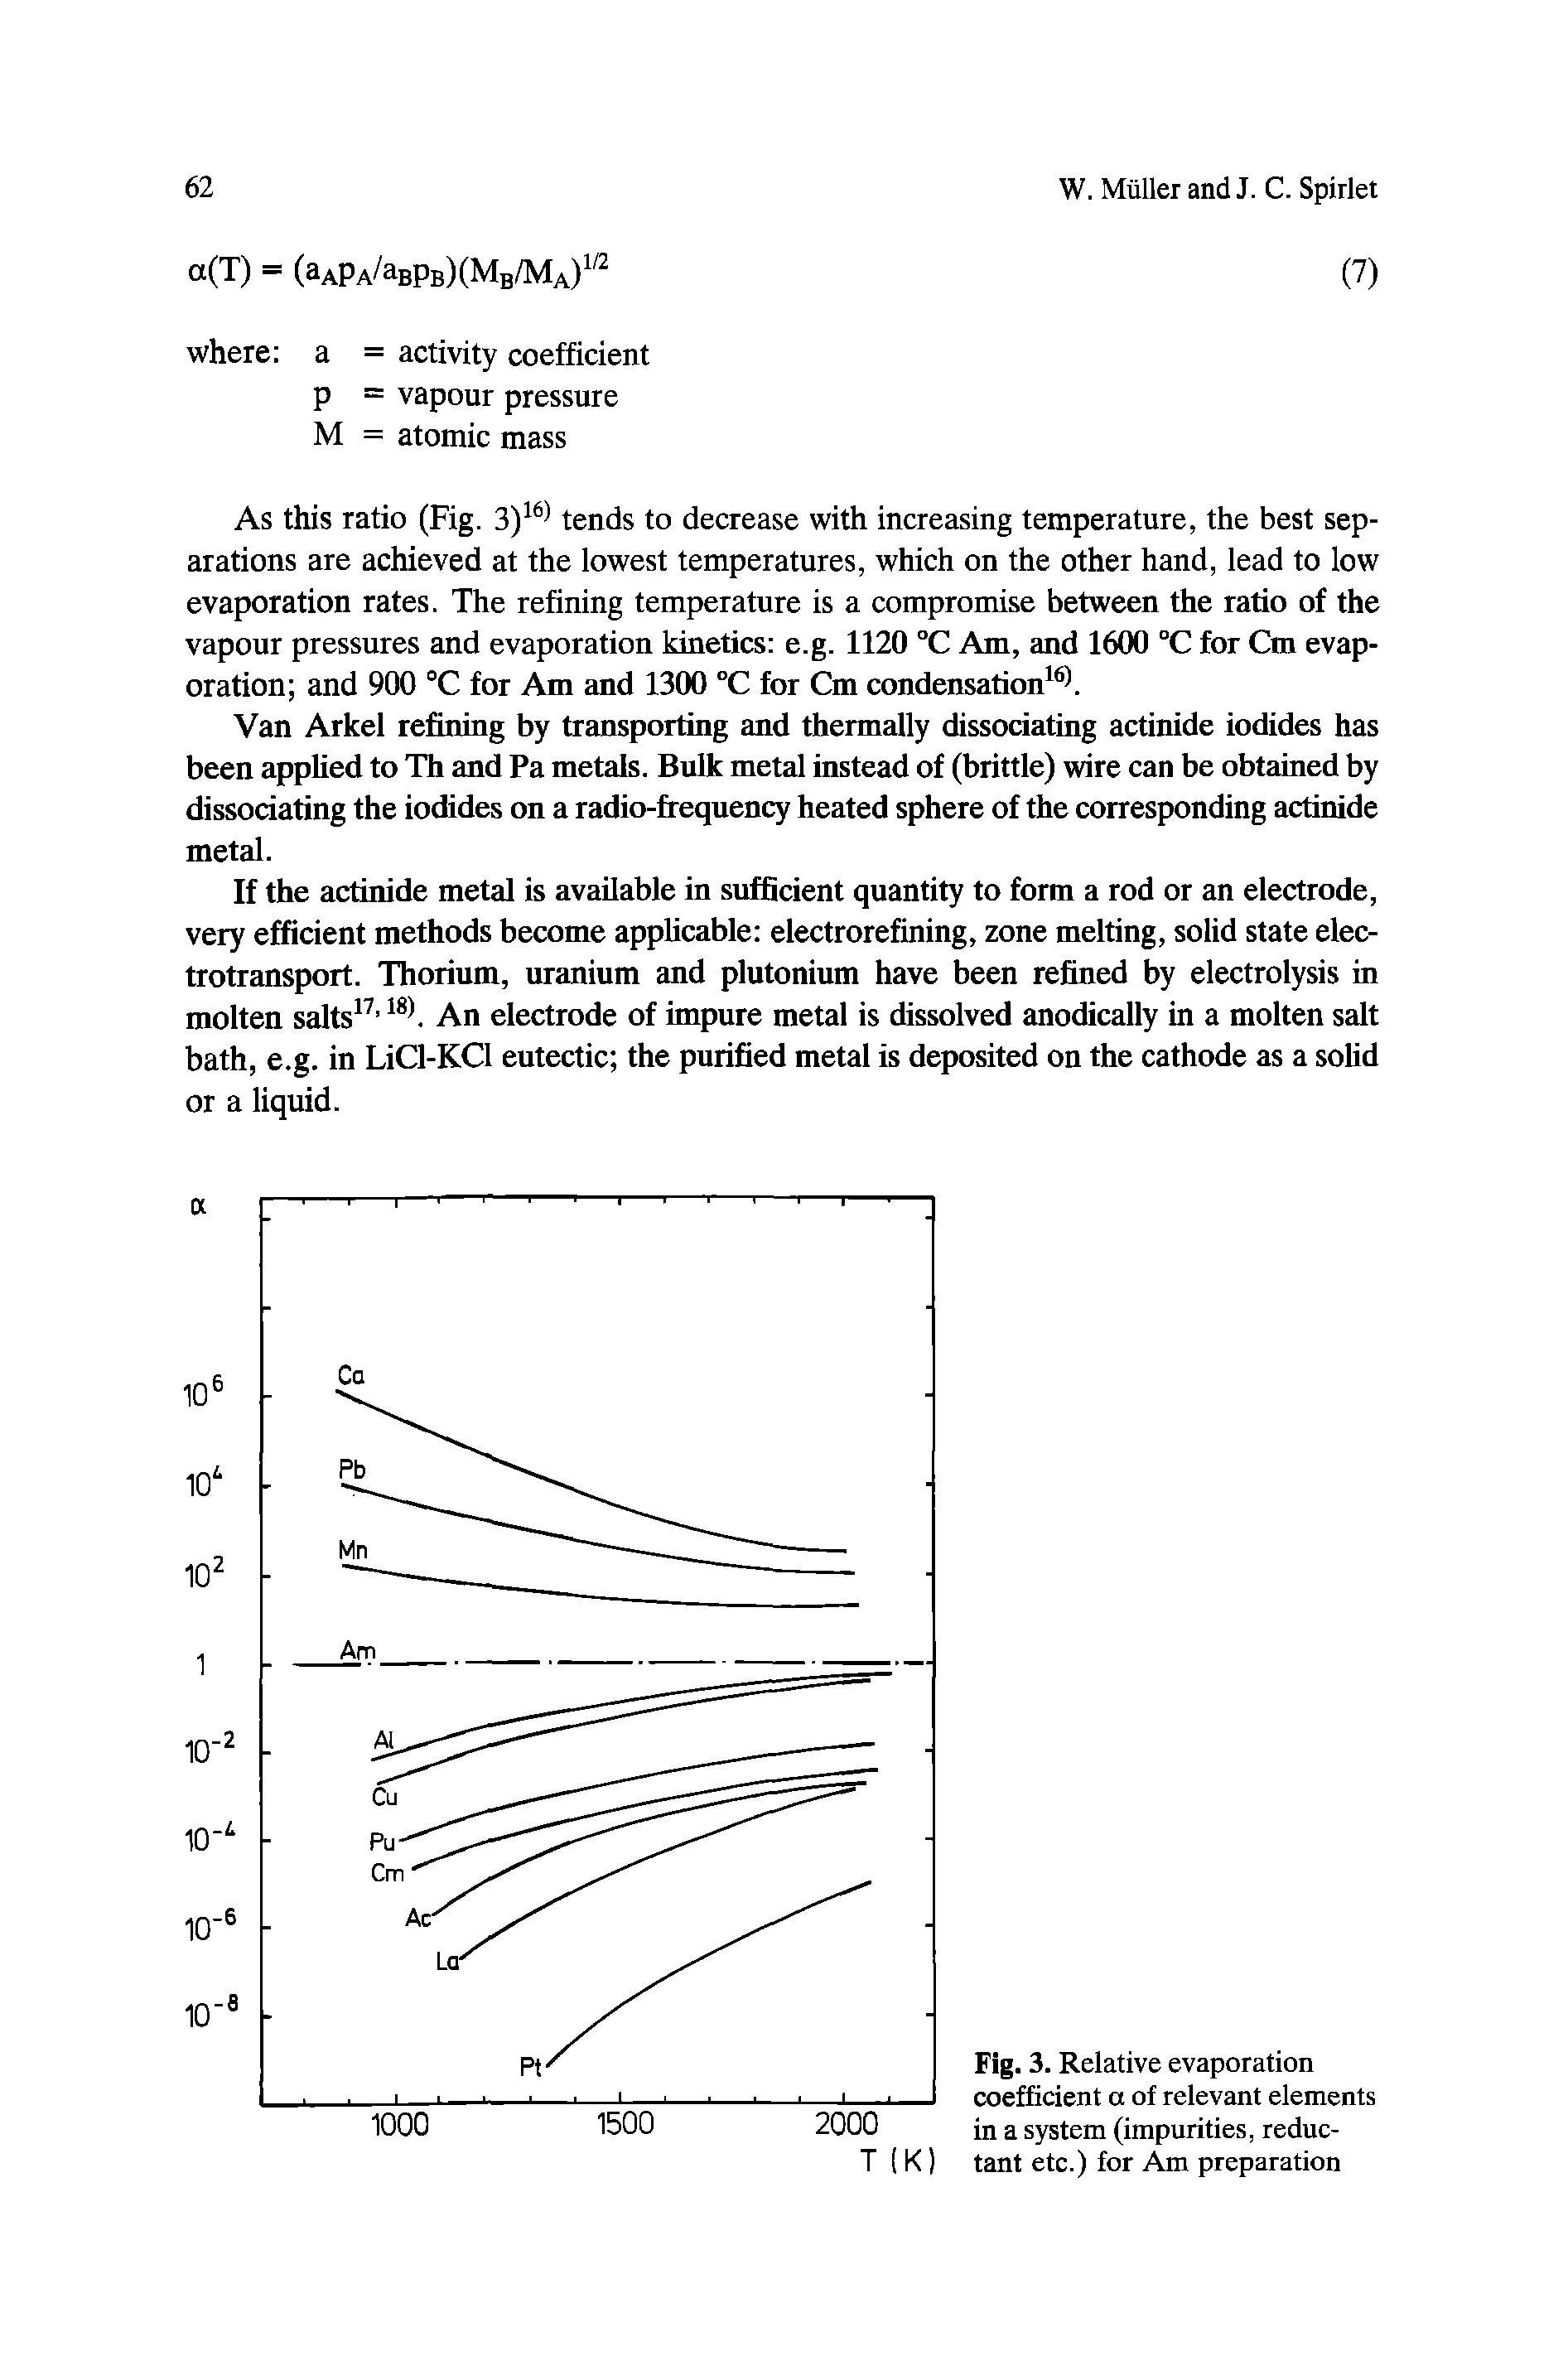 Fig. 3. Relative evaporation coefficient a of relevant elements in a system (impurities, reduc-...